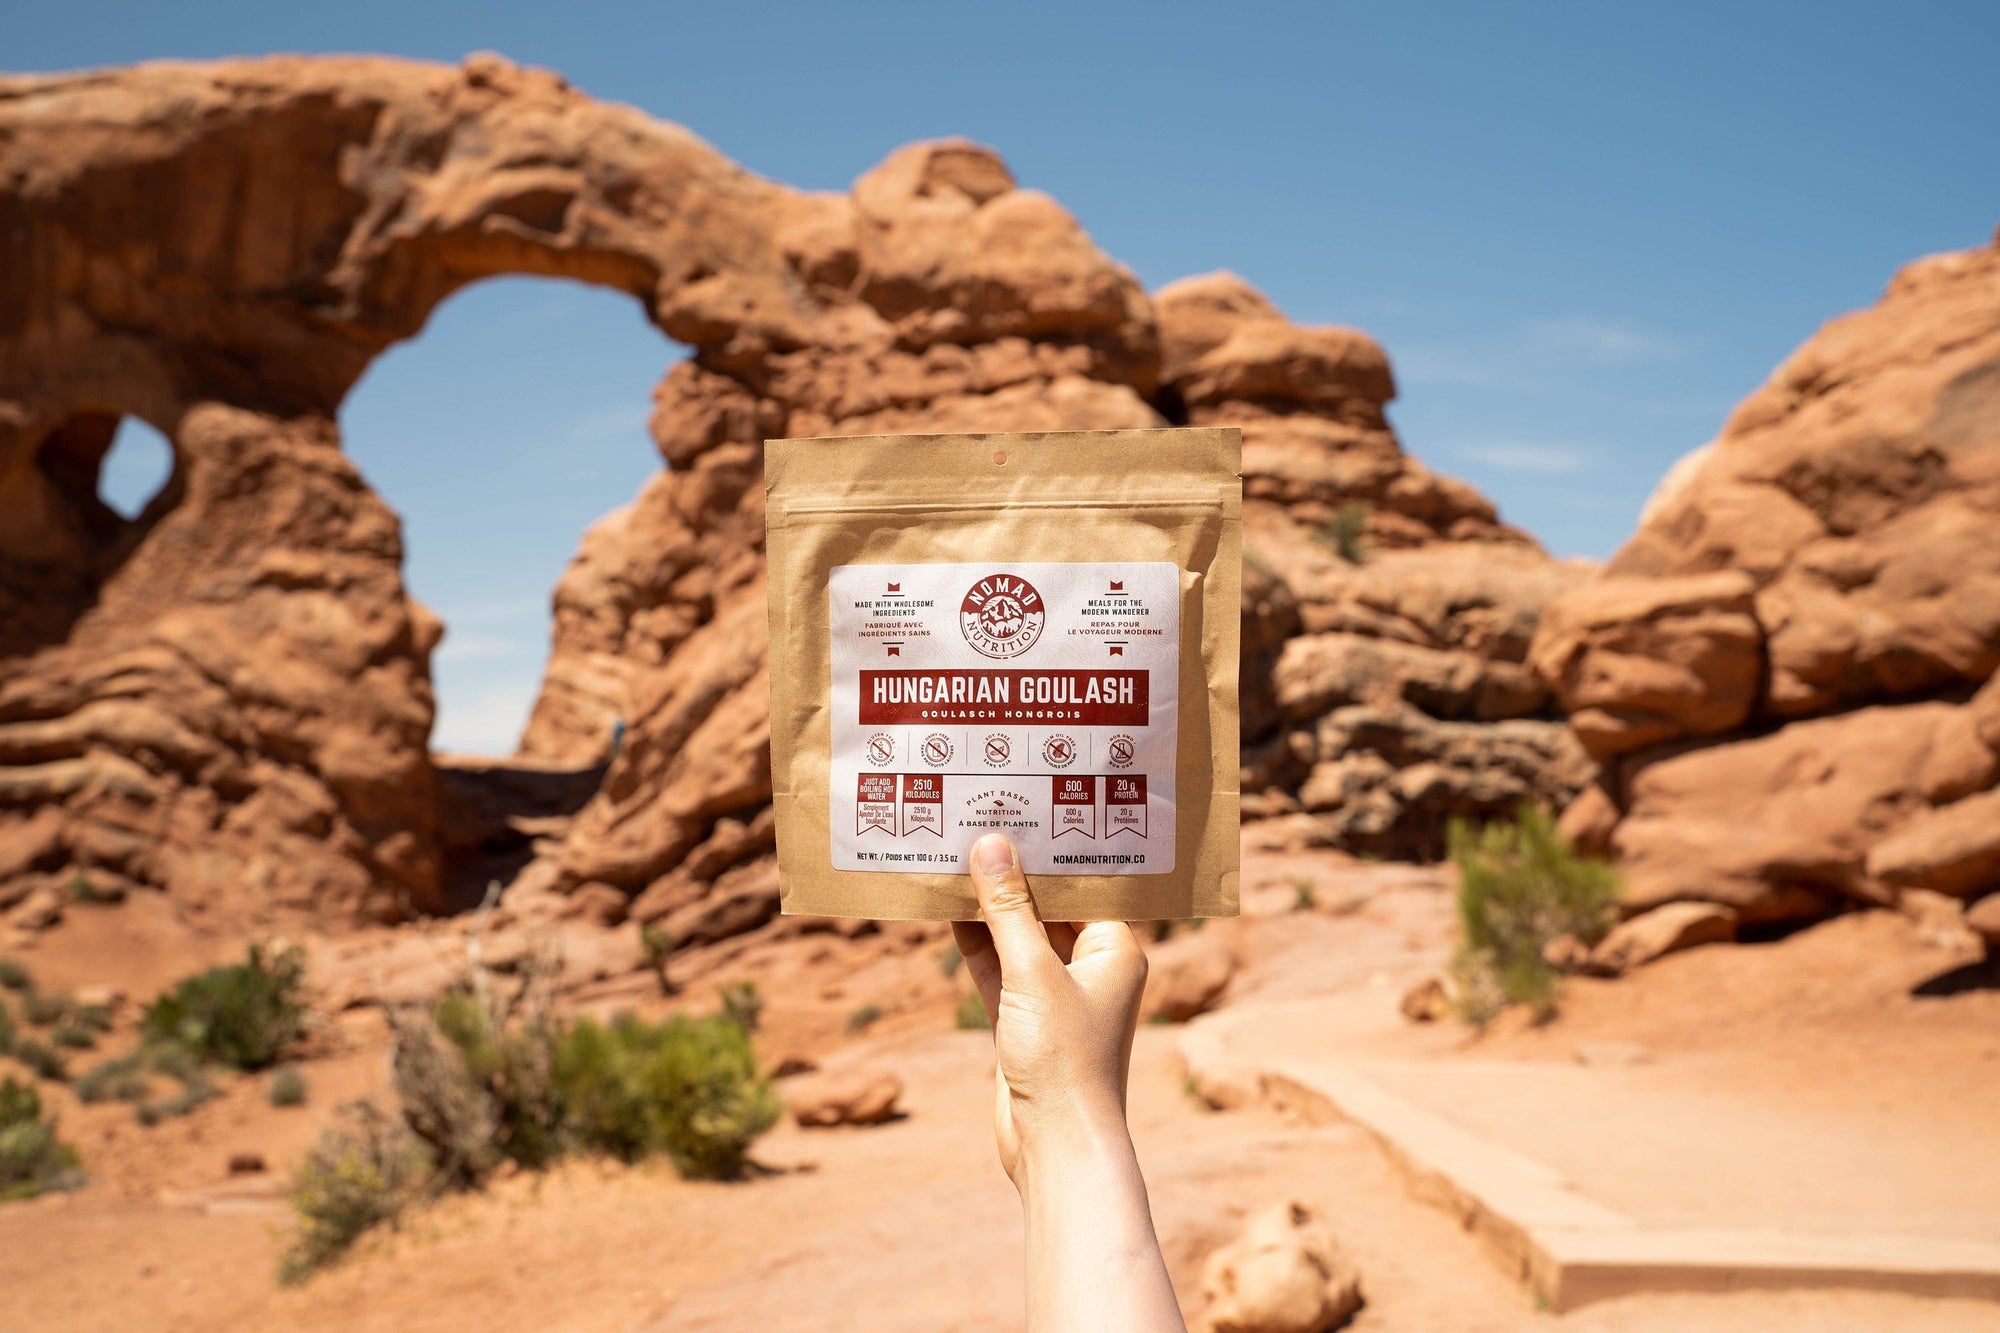 Nomad Nutrition Hungarian Goulash (112g/ 4oz) dehydrated vegan adventure plant-based, gluten-free meal at Arches National Park with canyons visible in the background.